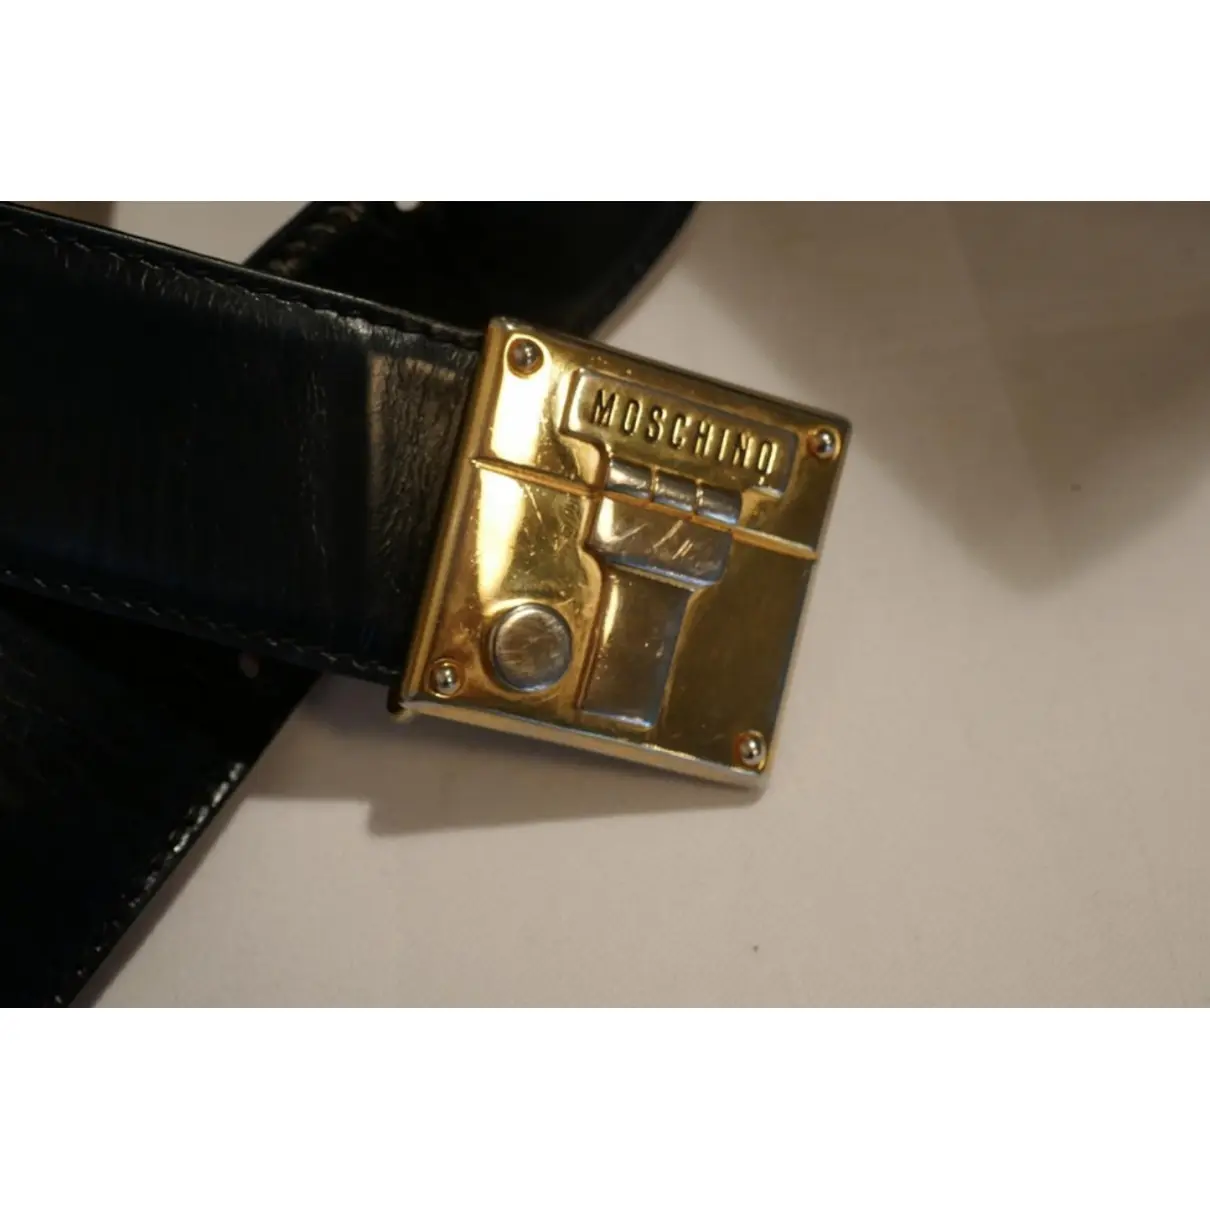 Buy Moschino Patent leather belt online